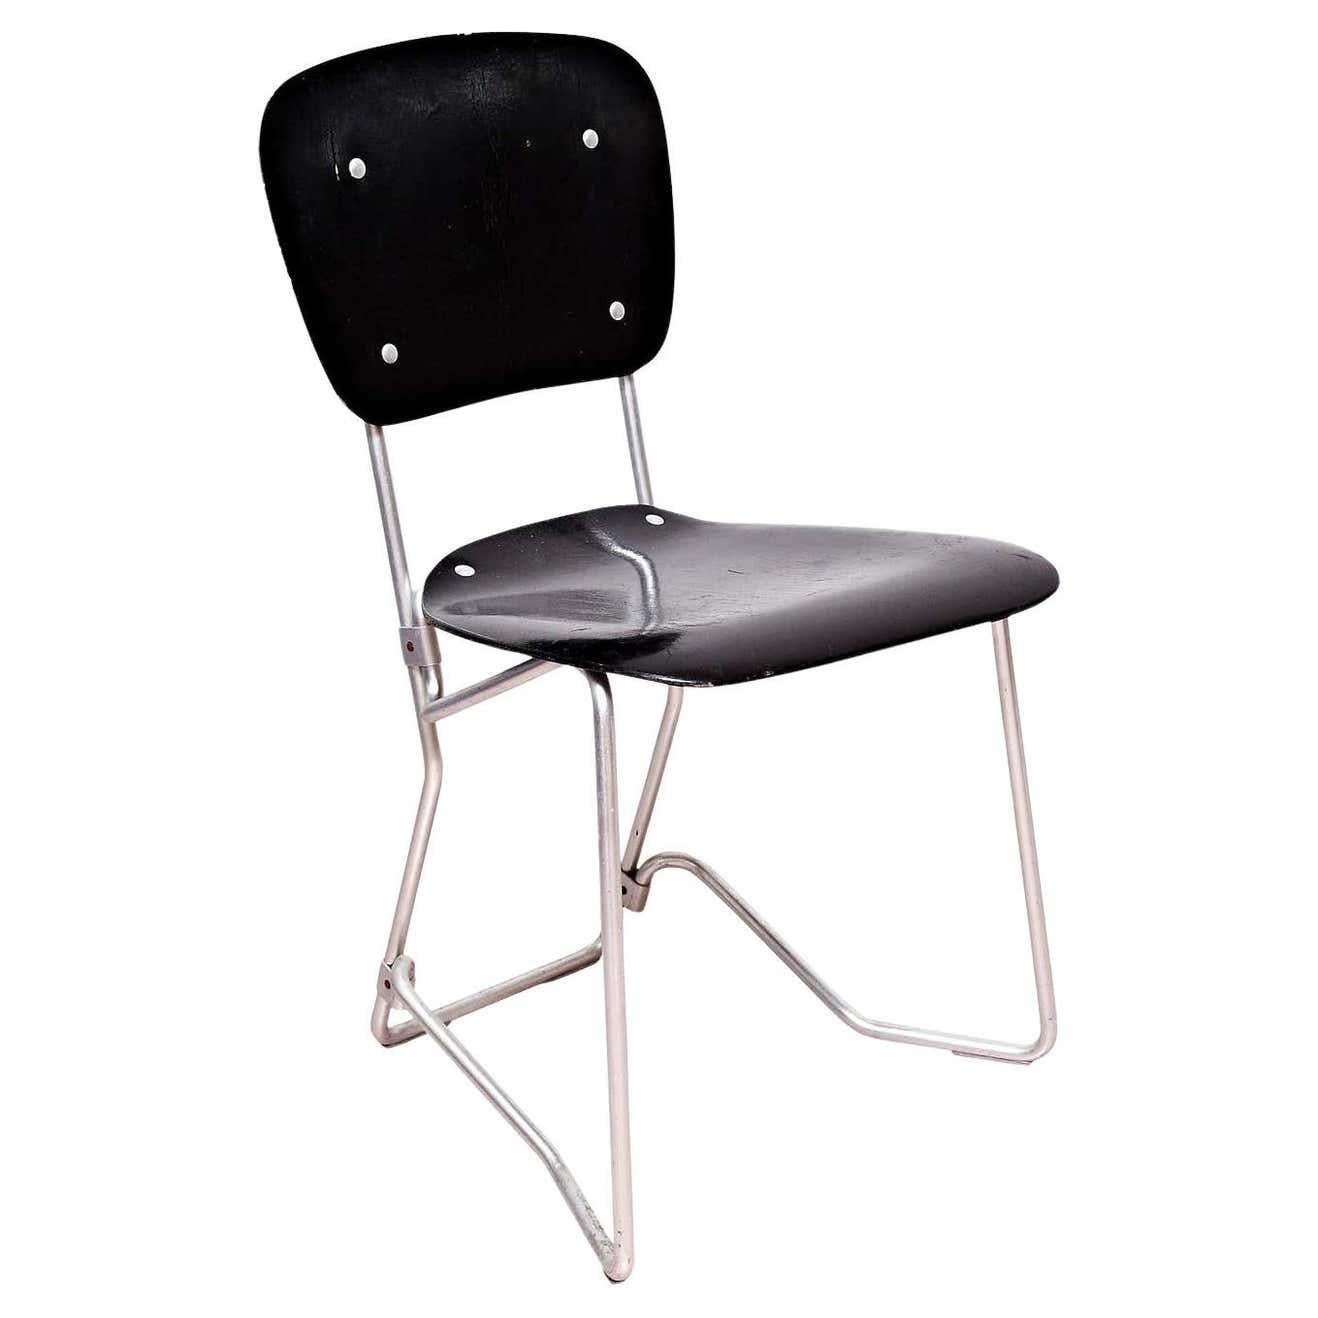 Armin Wirth Mid-Century Modern Metal and Wood Swiss Stackable Chairs for Aluflex For Sale 6